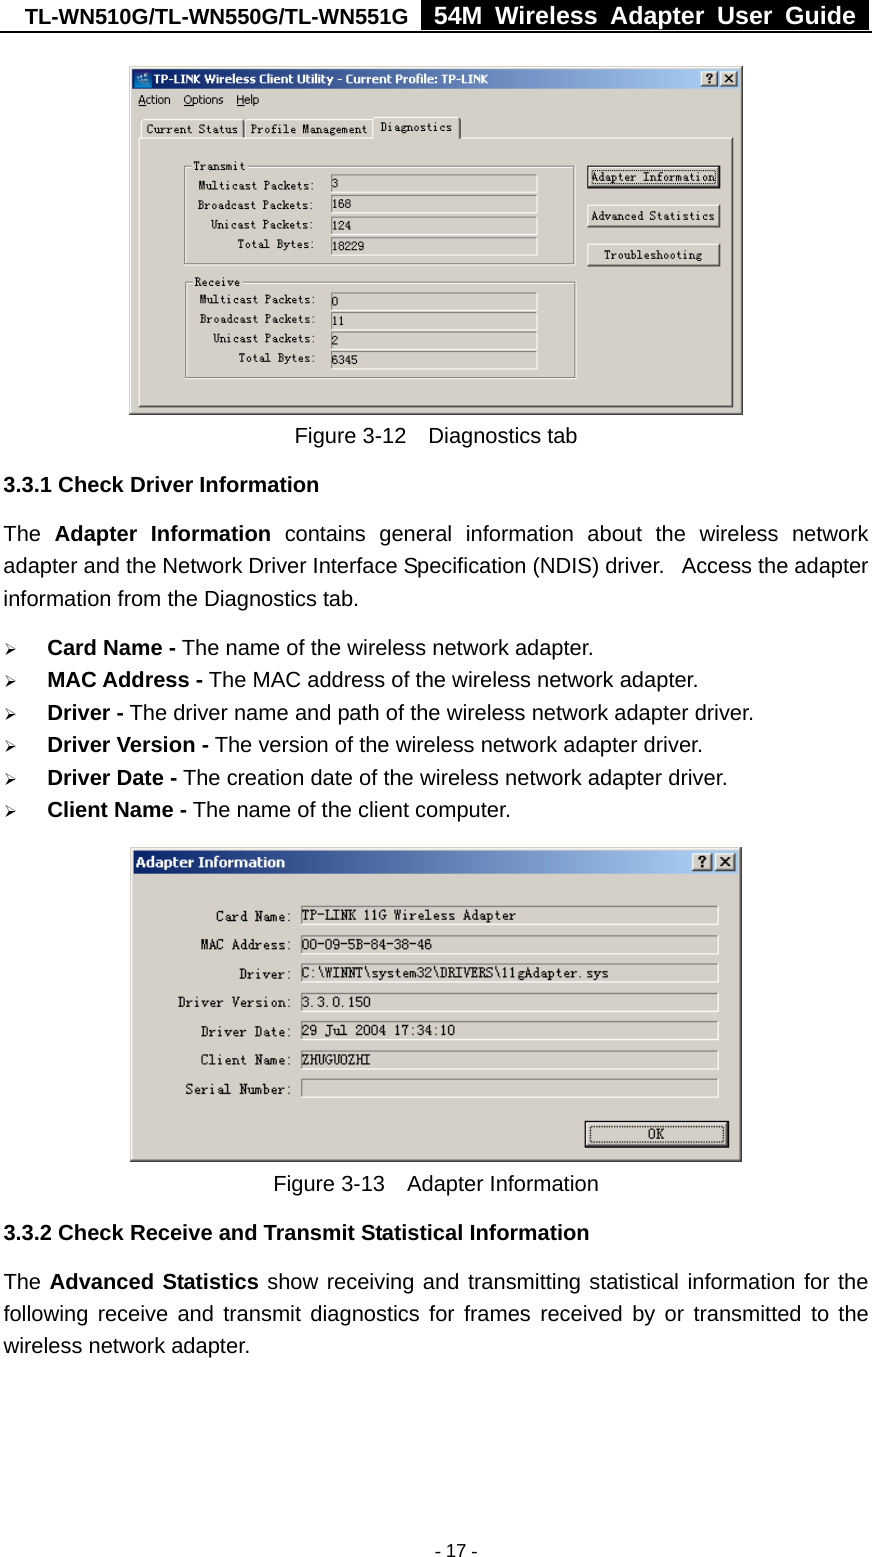 TL-WN510G/TL-WN550G/TL-WN551G  54M Wireless Adapter User Guide   - 17 - Figure 3-12  Diagnostics tab 3.3.1 Check Driver Information The  Adapter Information contains general information about the wireless network adapter and the Network Driver Interface Specification (NDIS) driver.   Access the adapter information from the Diagnostics tab. ¾ Card Name - The name of the wireless network adapter.   ¾ MAC Address - The MAC address of the wireless network adapter.   ¾ Driver - The driver name and path of the wireless network adapter driver. ¾ Driver Version - The version of the wireless network adapter driver. ¾ Driver Date - The creation date of the wireless network adapter driver. ¾ Client Name - The name of the client computer.    Figure 3-13  Adapter Information 3.3.2 Check Receive and Transmit Statistical Information The Advanced Statistics show receiving and transmitting statistical information for the following receive and transmit diagnostics for frames received by or transmitted to the wireless network adapter. 